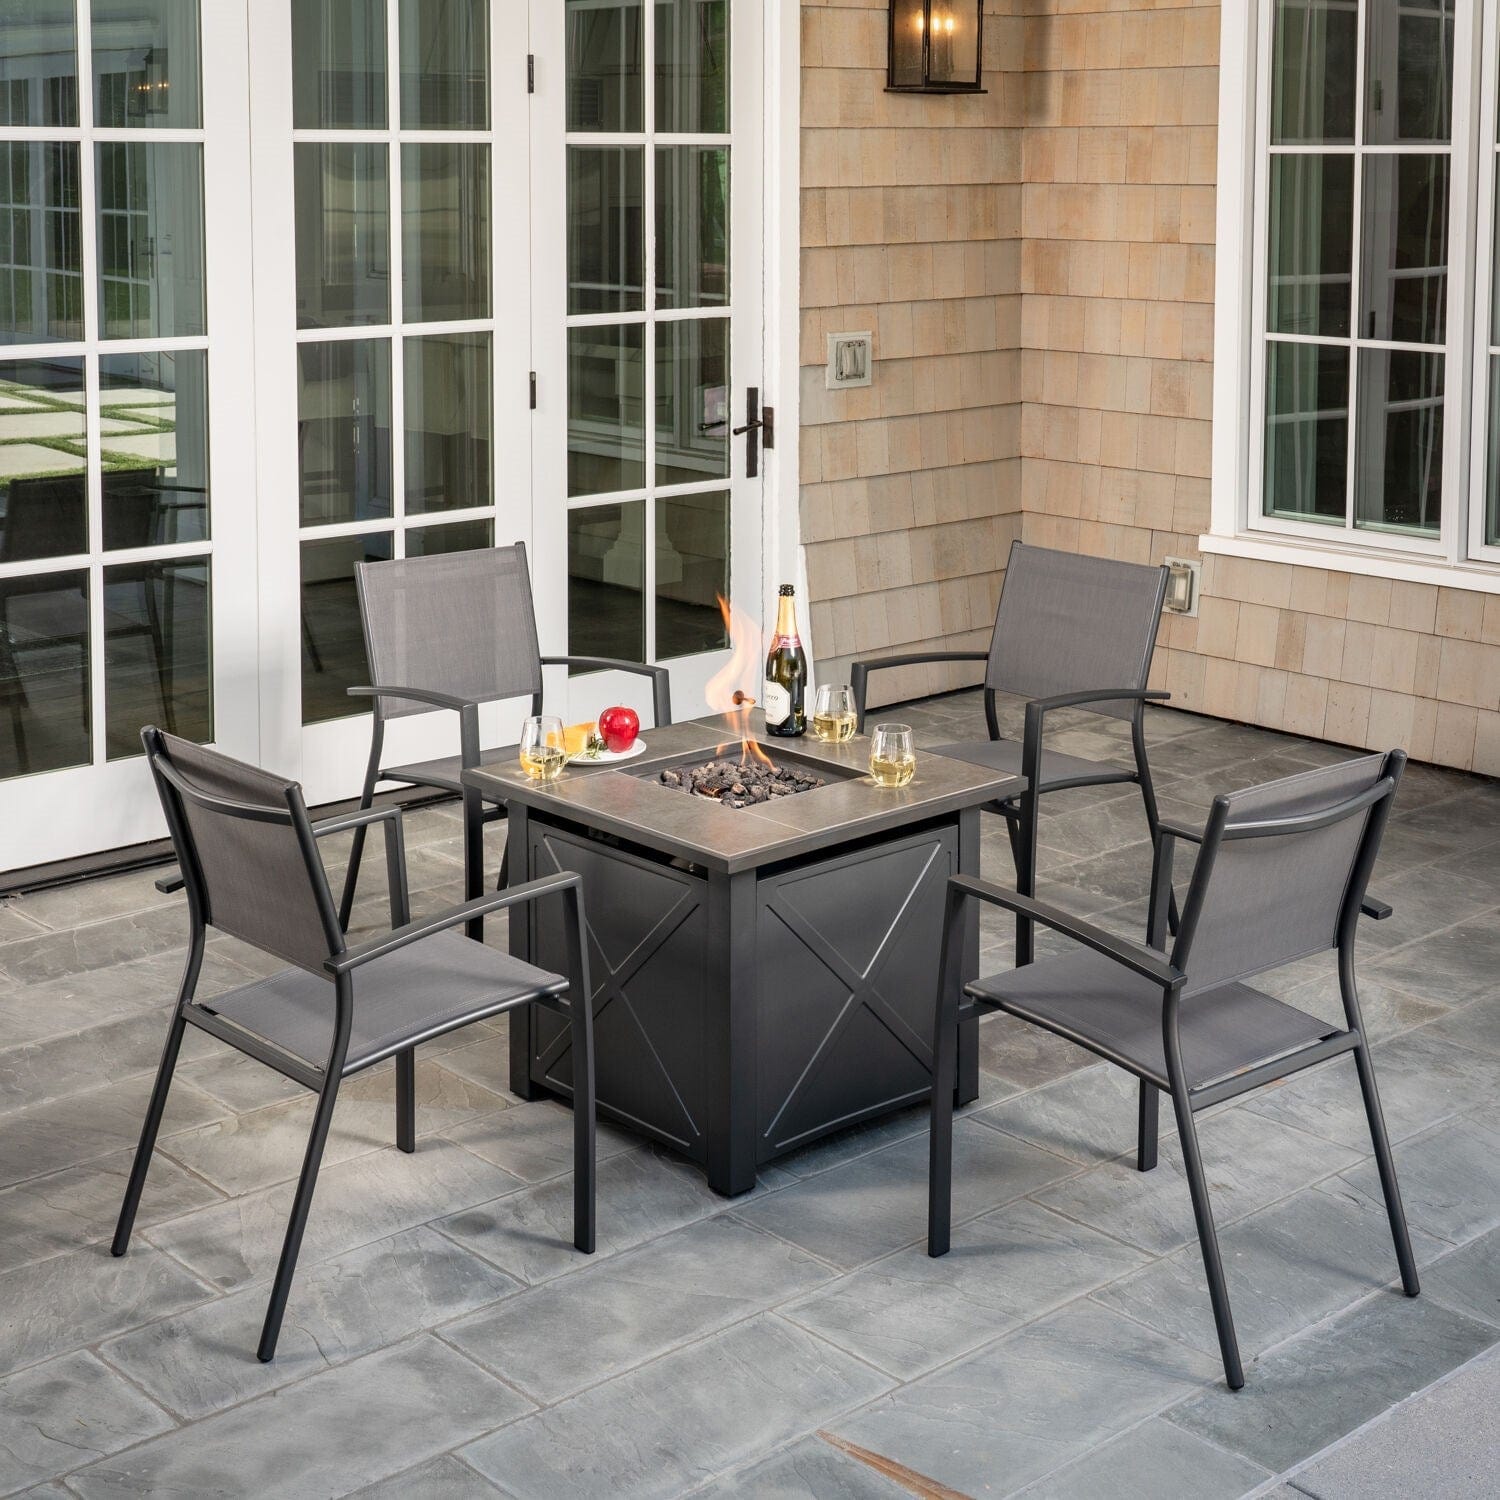 Hanover Fire Pit Chat Set Hanover- Naples 5-Piece Fire Pit Chat Set: 4 Sling Chairs and 40,000 BTU Tile-Top Fire Pit Table w/ Burner Cover, Black/Gray | 23x22 | NAPLES5PCSLFP-GRY